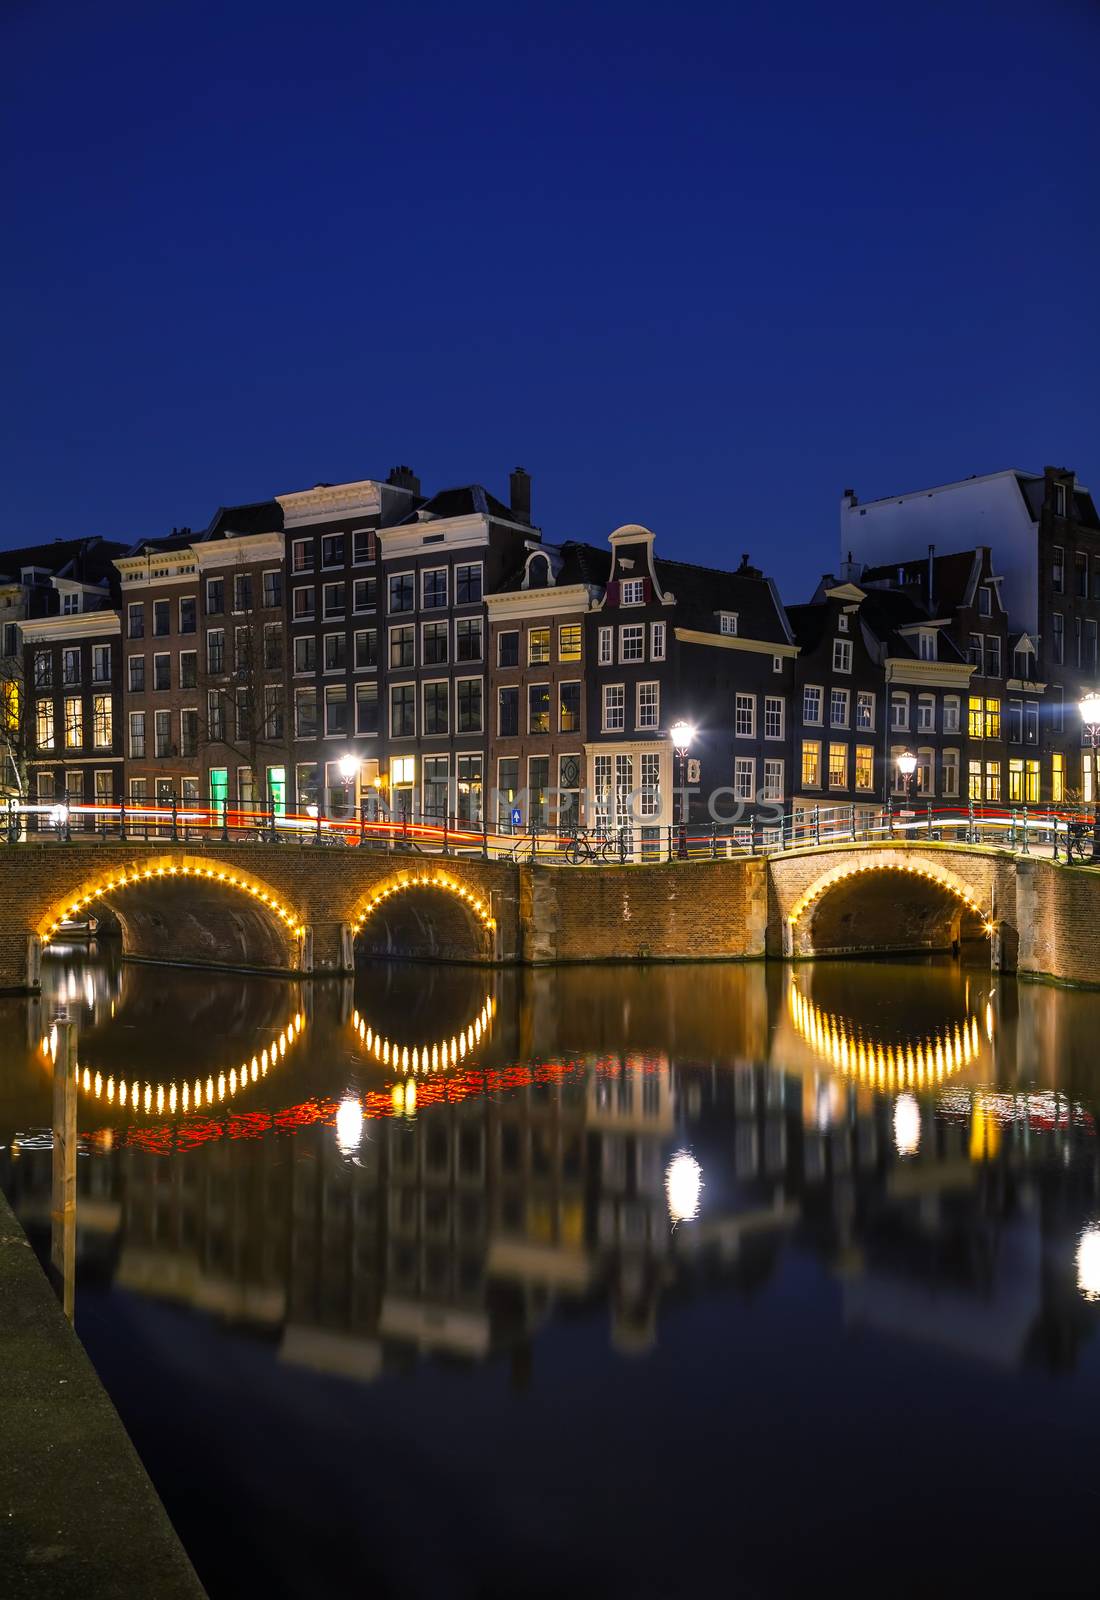 Night city view of Amsterdam, the Netherlands with a canal